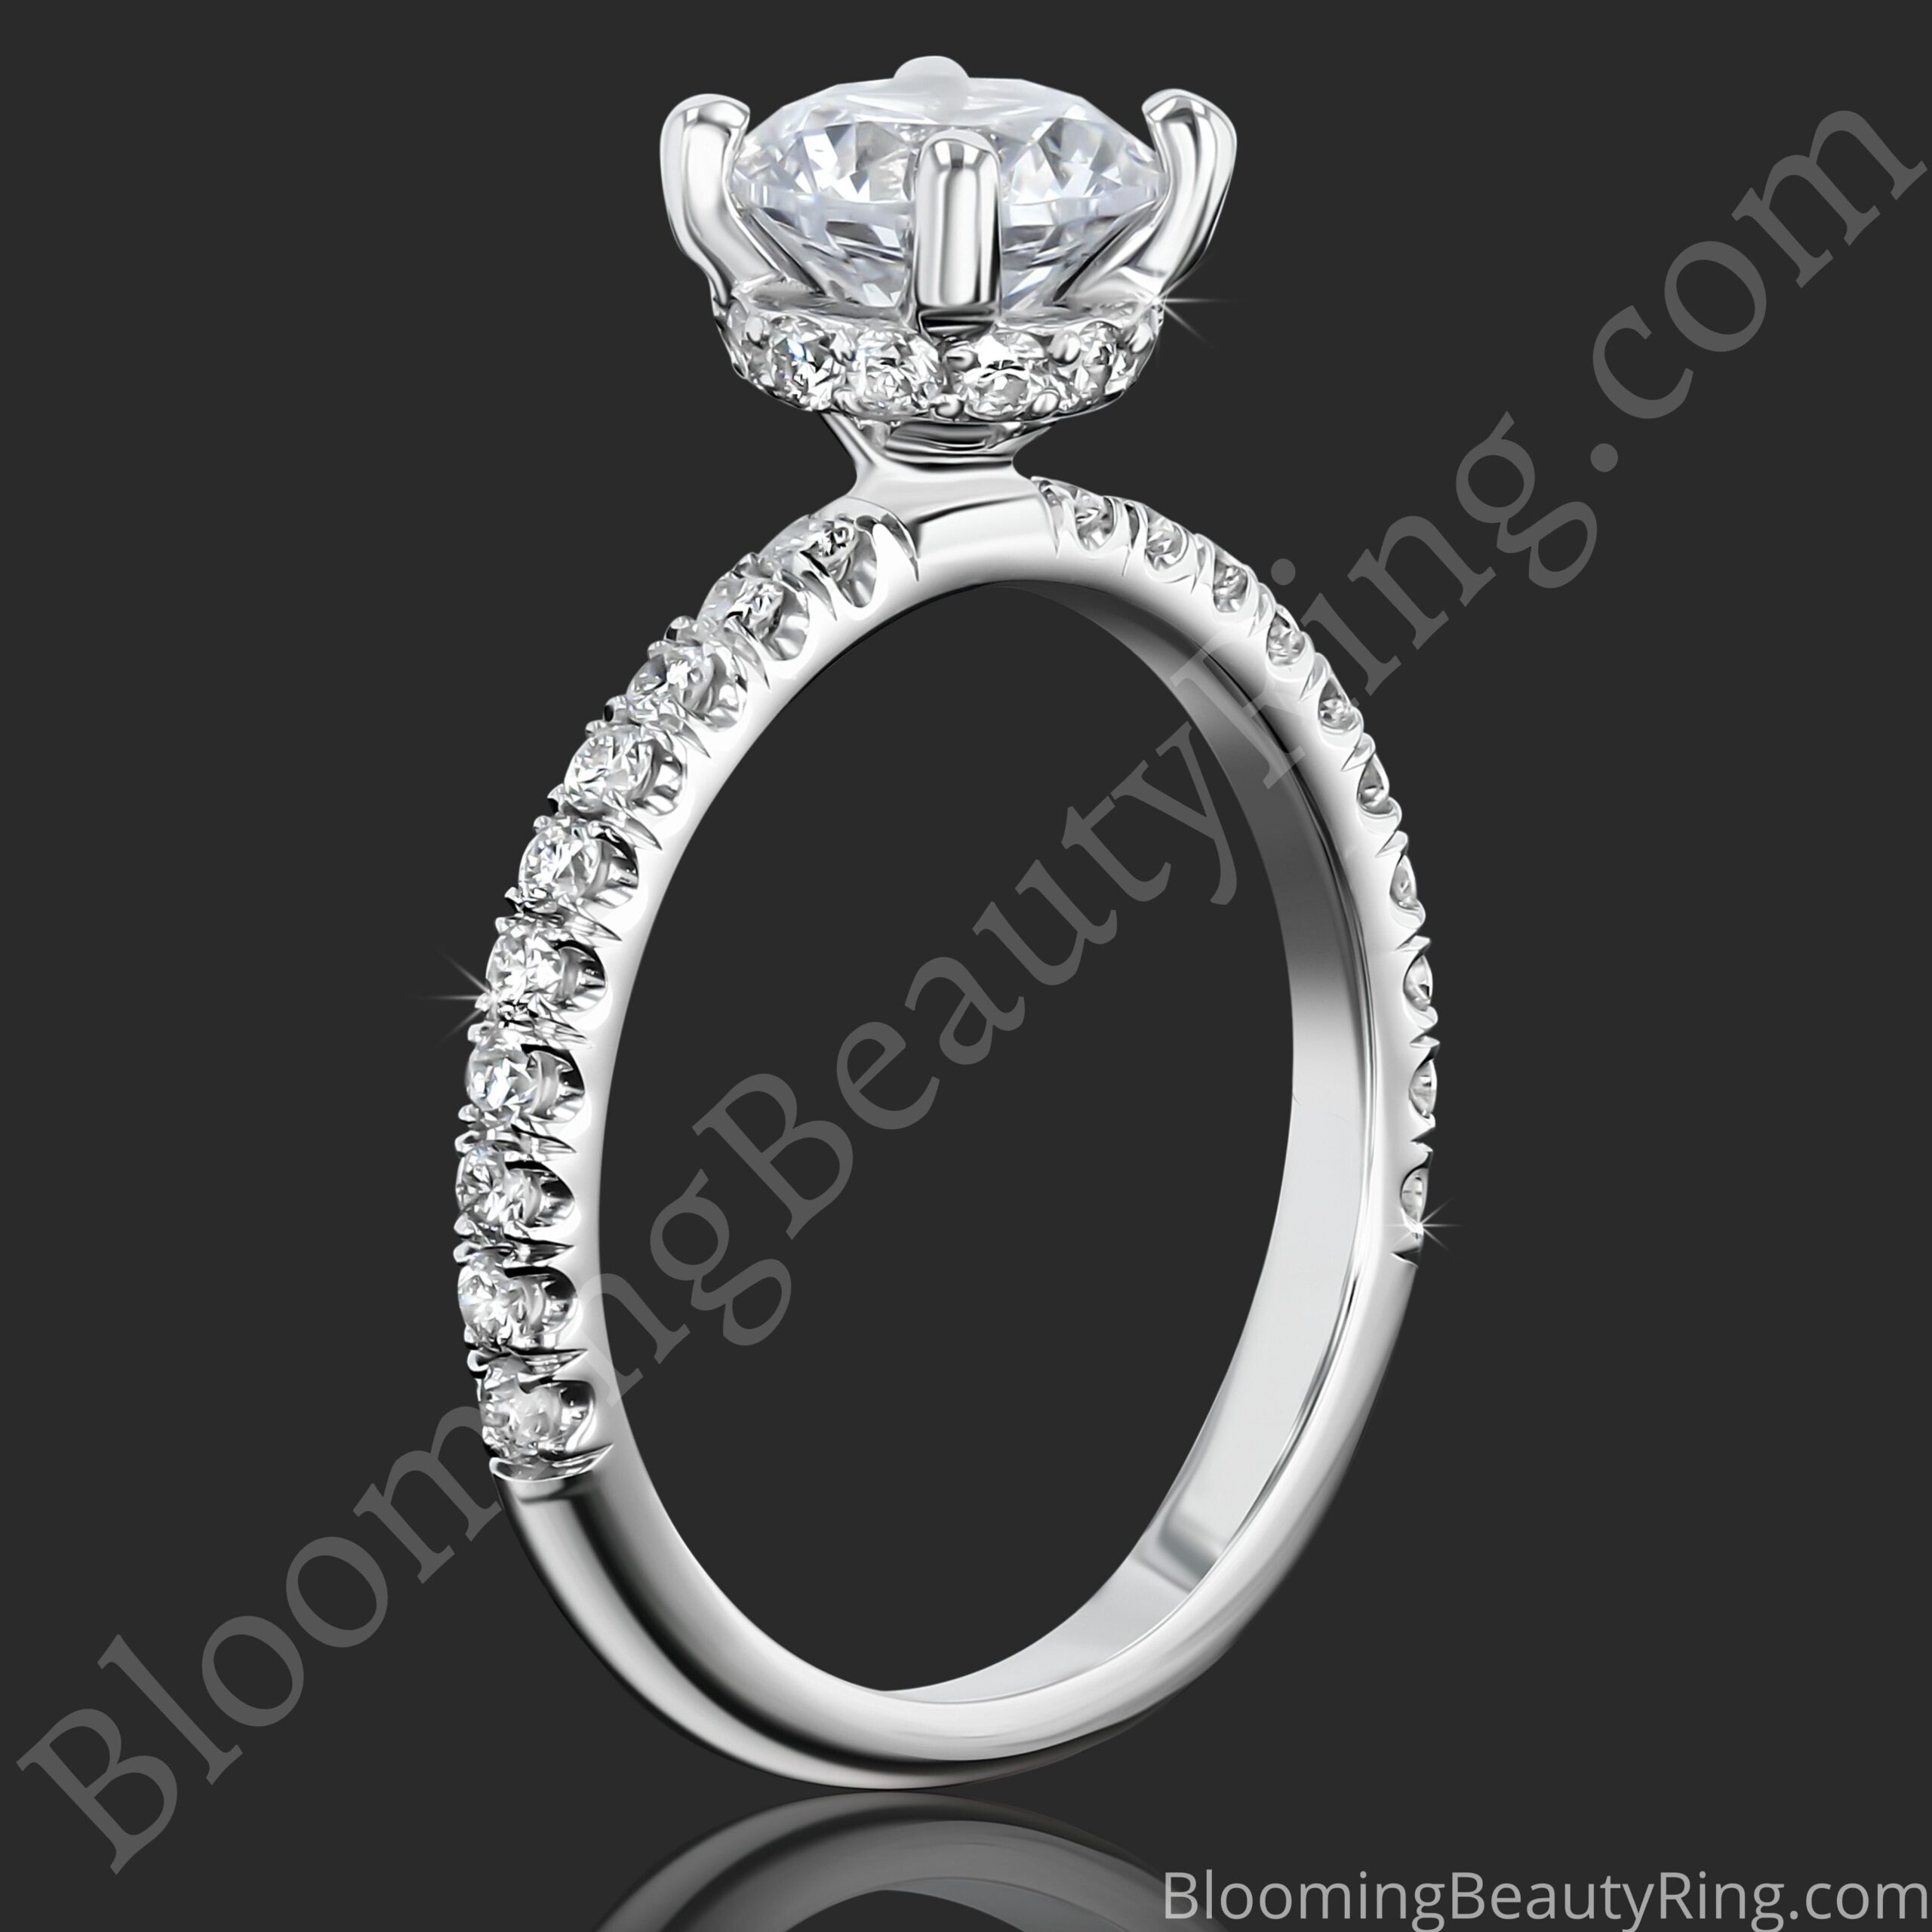 0.50 ctw Diamond Engagement Ring BBR-738E standing up